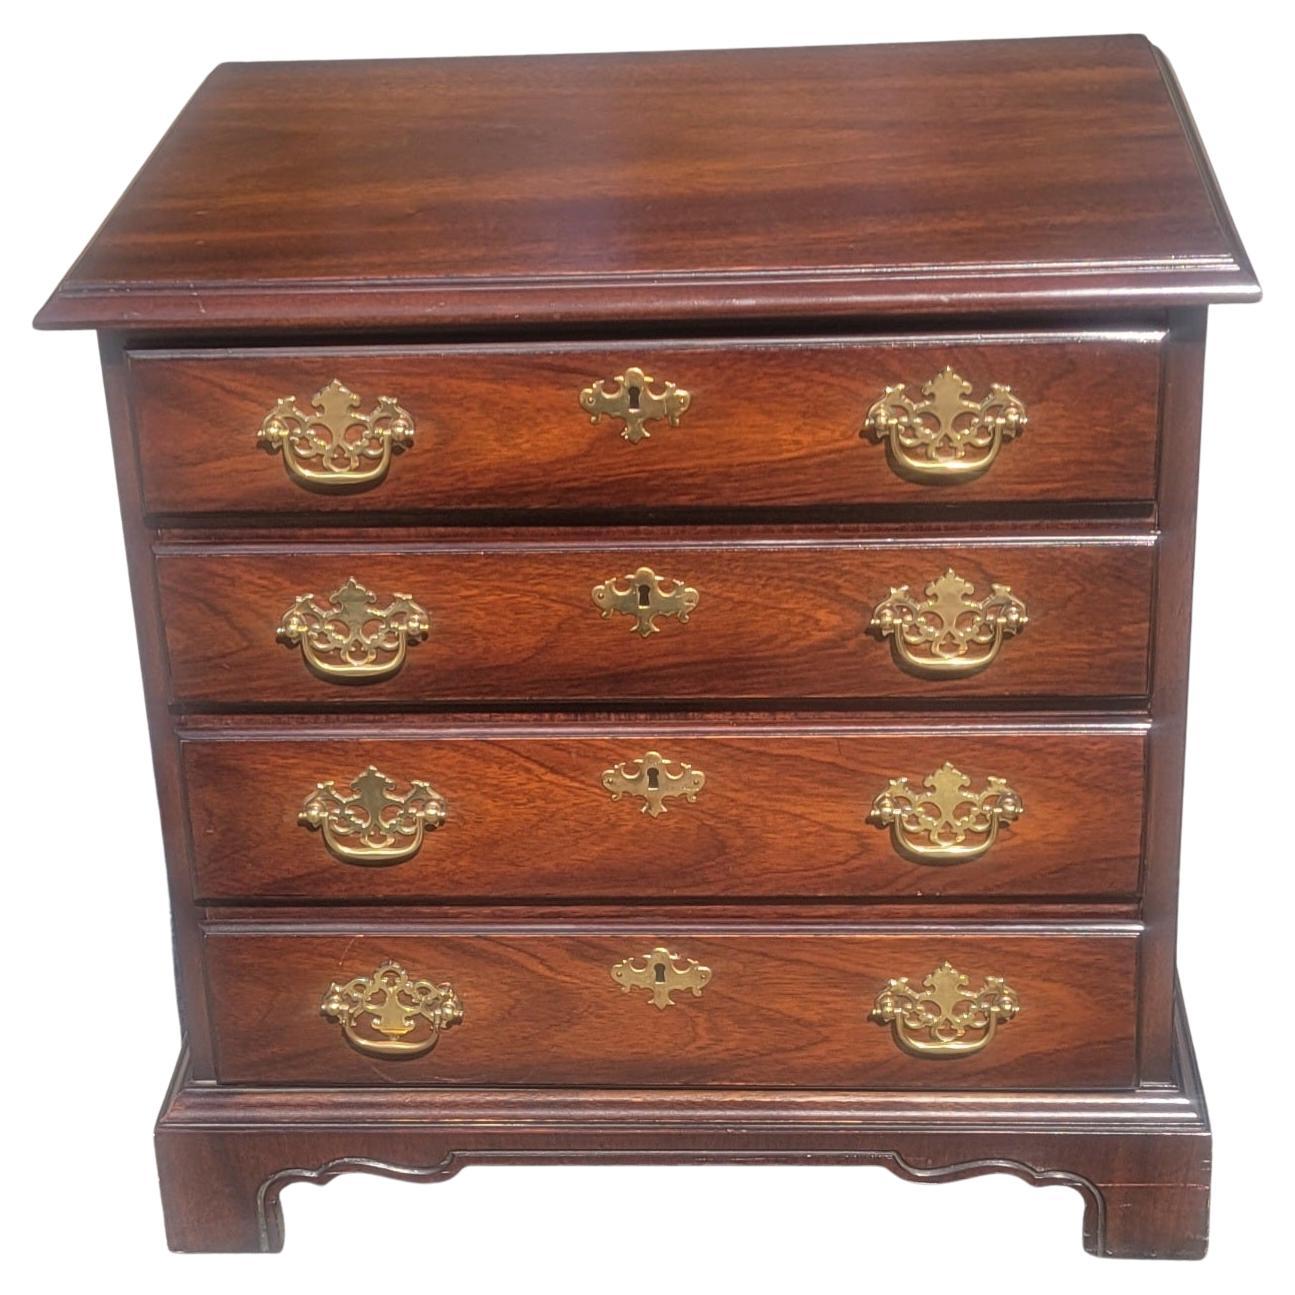 Drexel Bicentennial Chippendale Mahogany Four Drawers Bedside Chest of Drawers